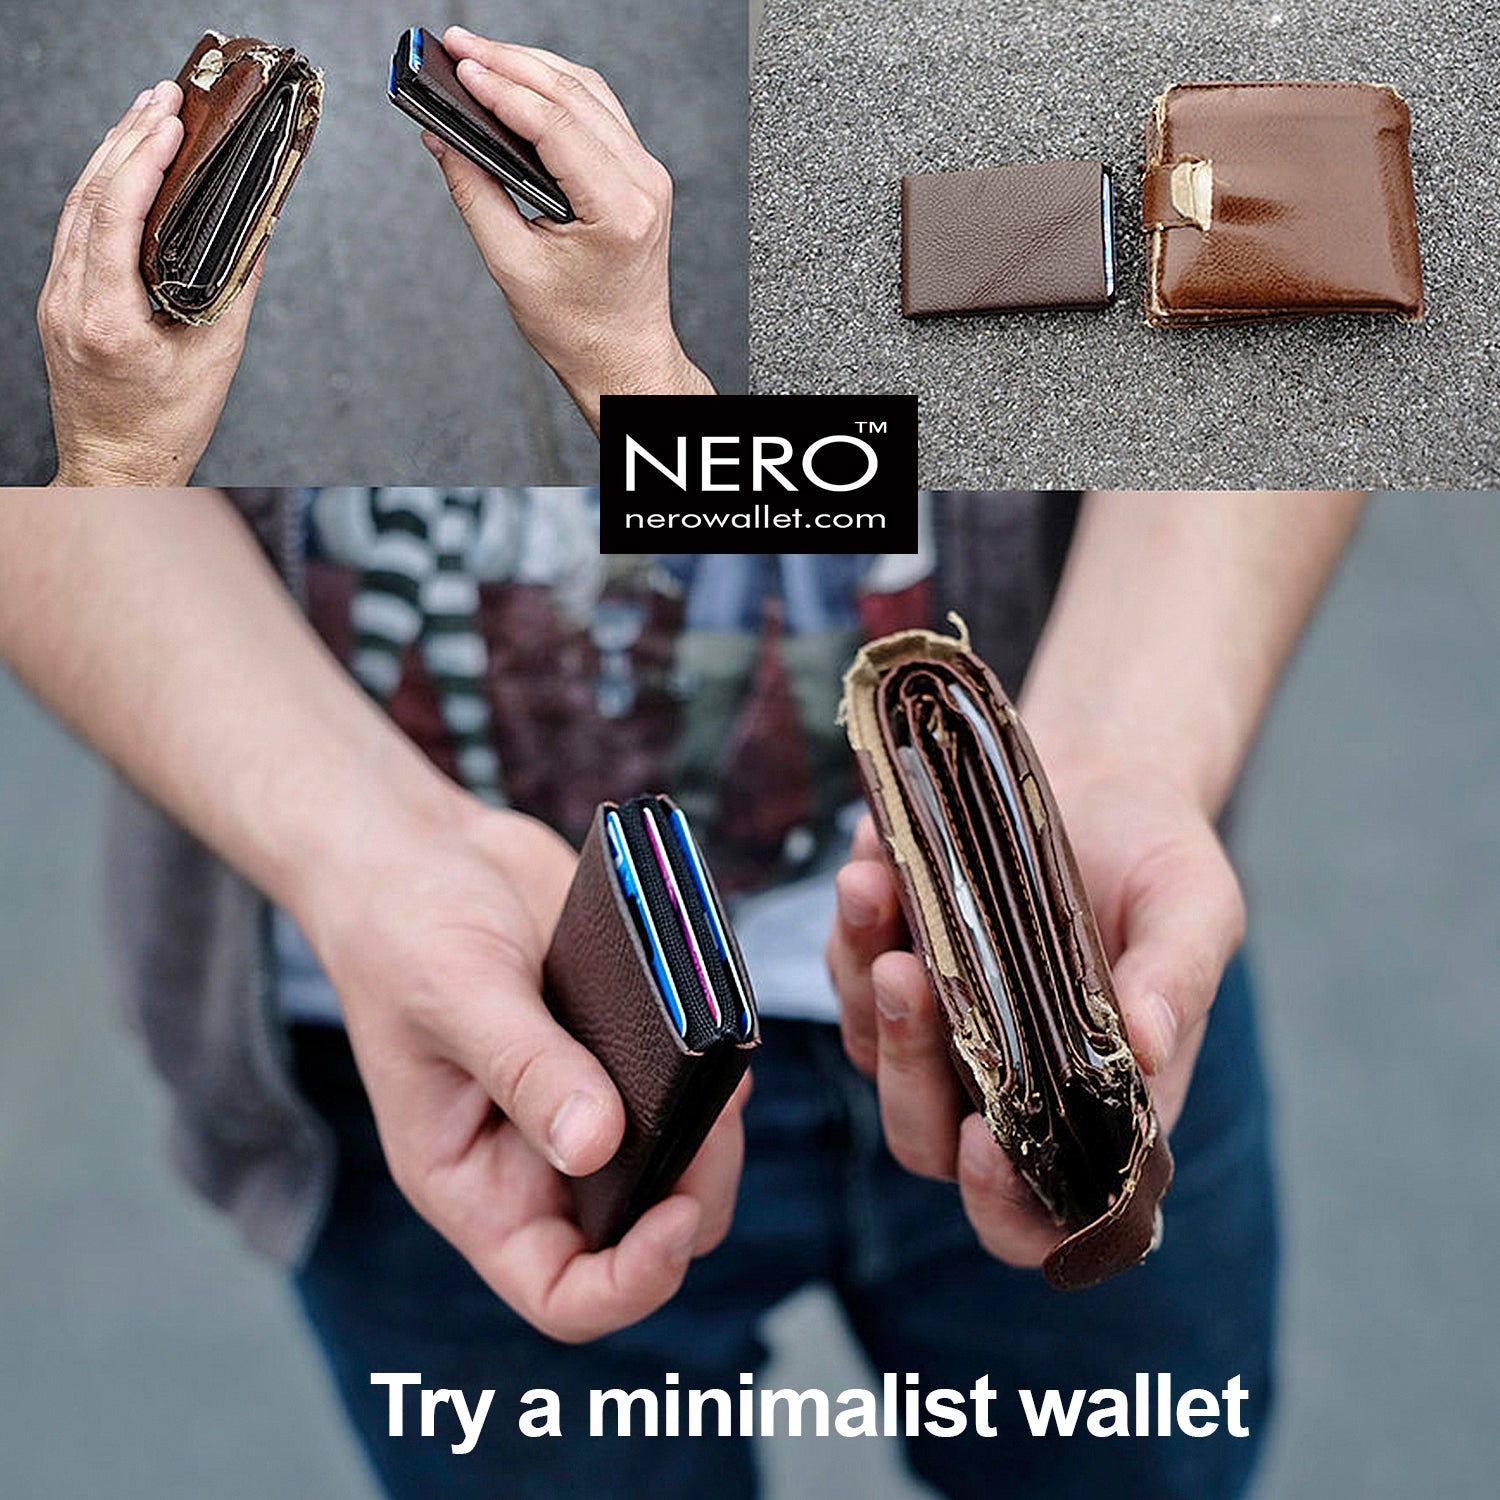 Why Slim Wallets Are Better